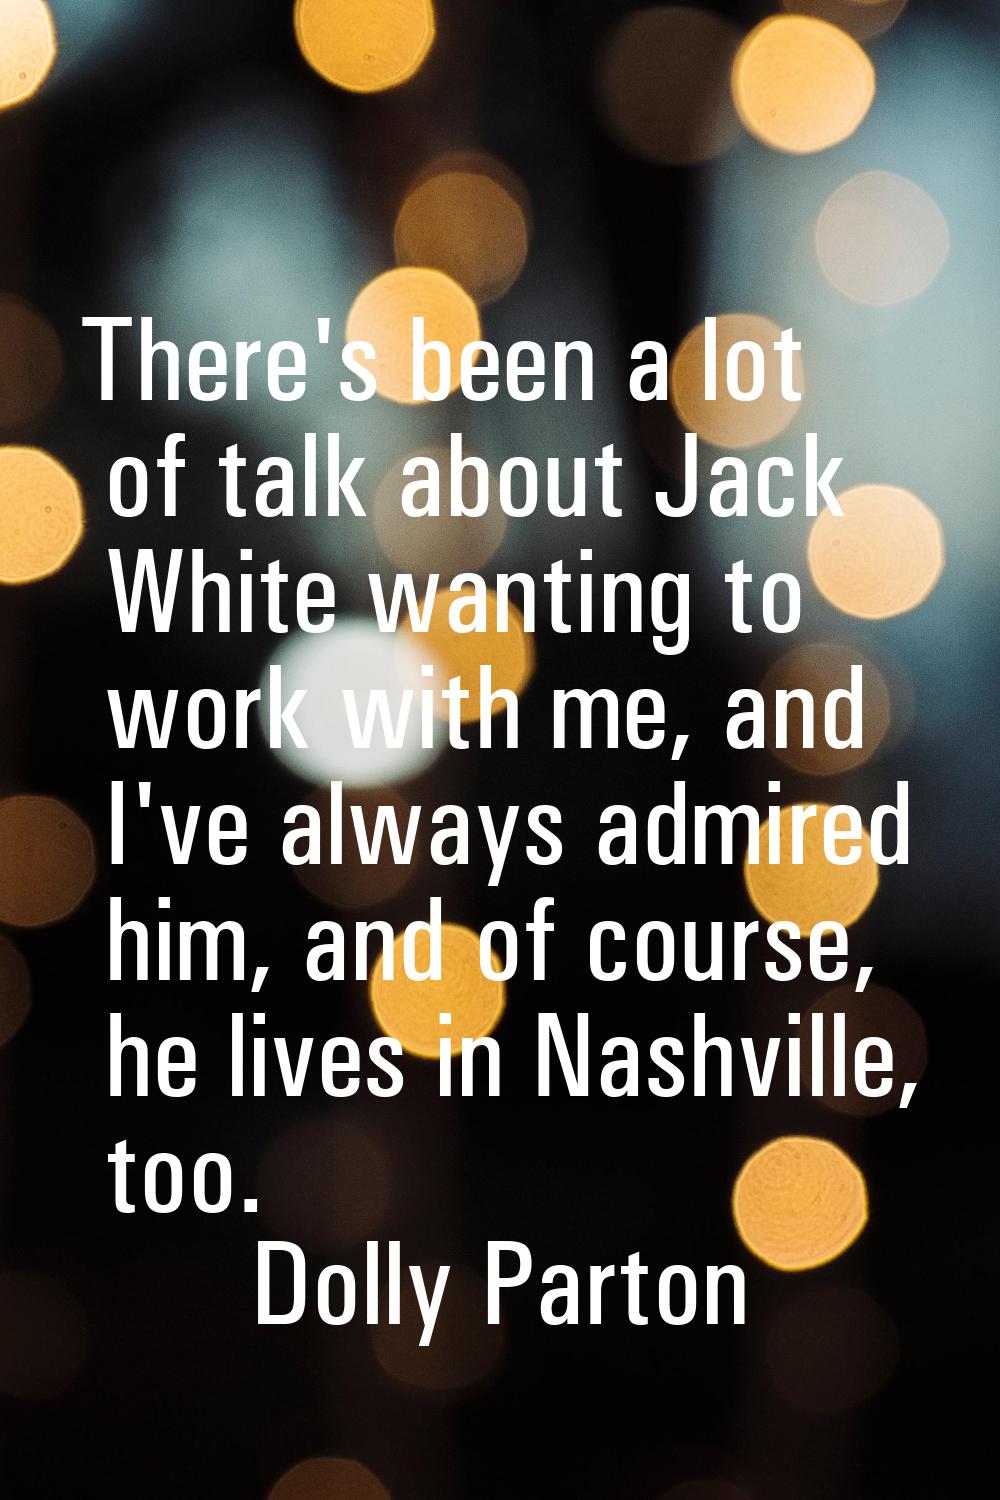 There's been a lot of talk about Jack White wanting to work with me, and I've always admired him, a